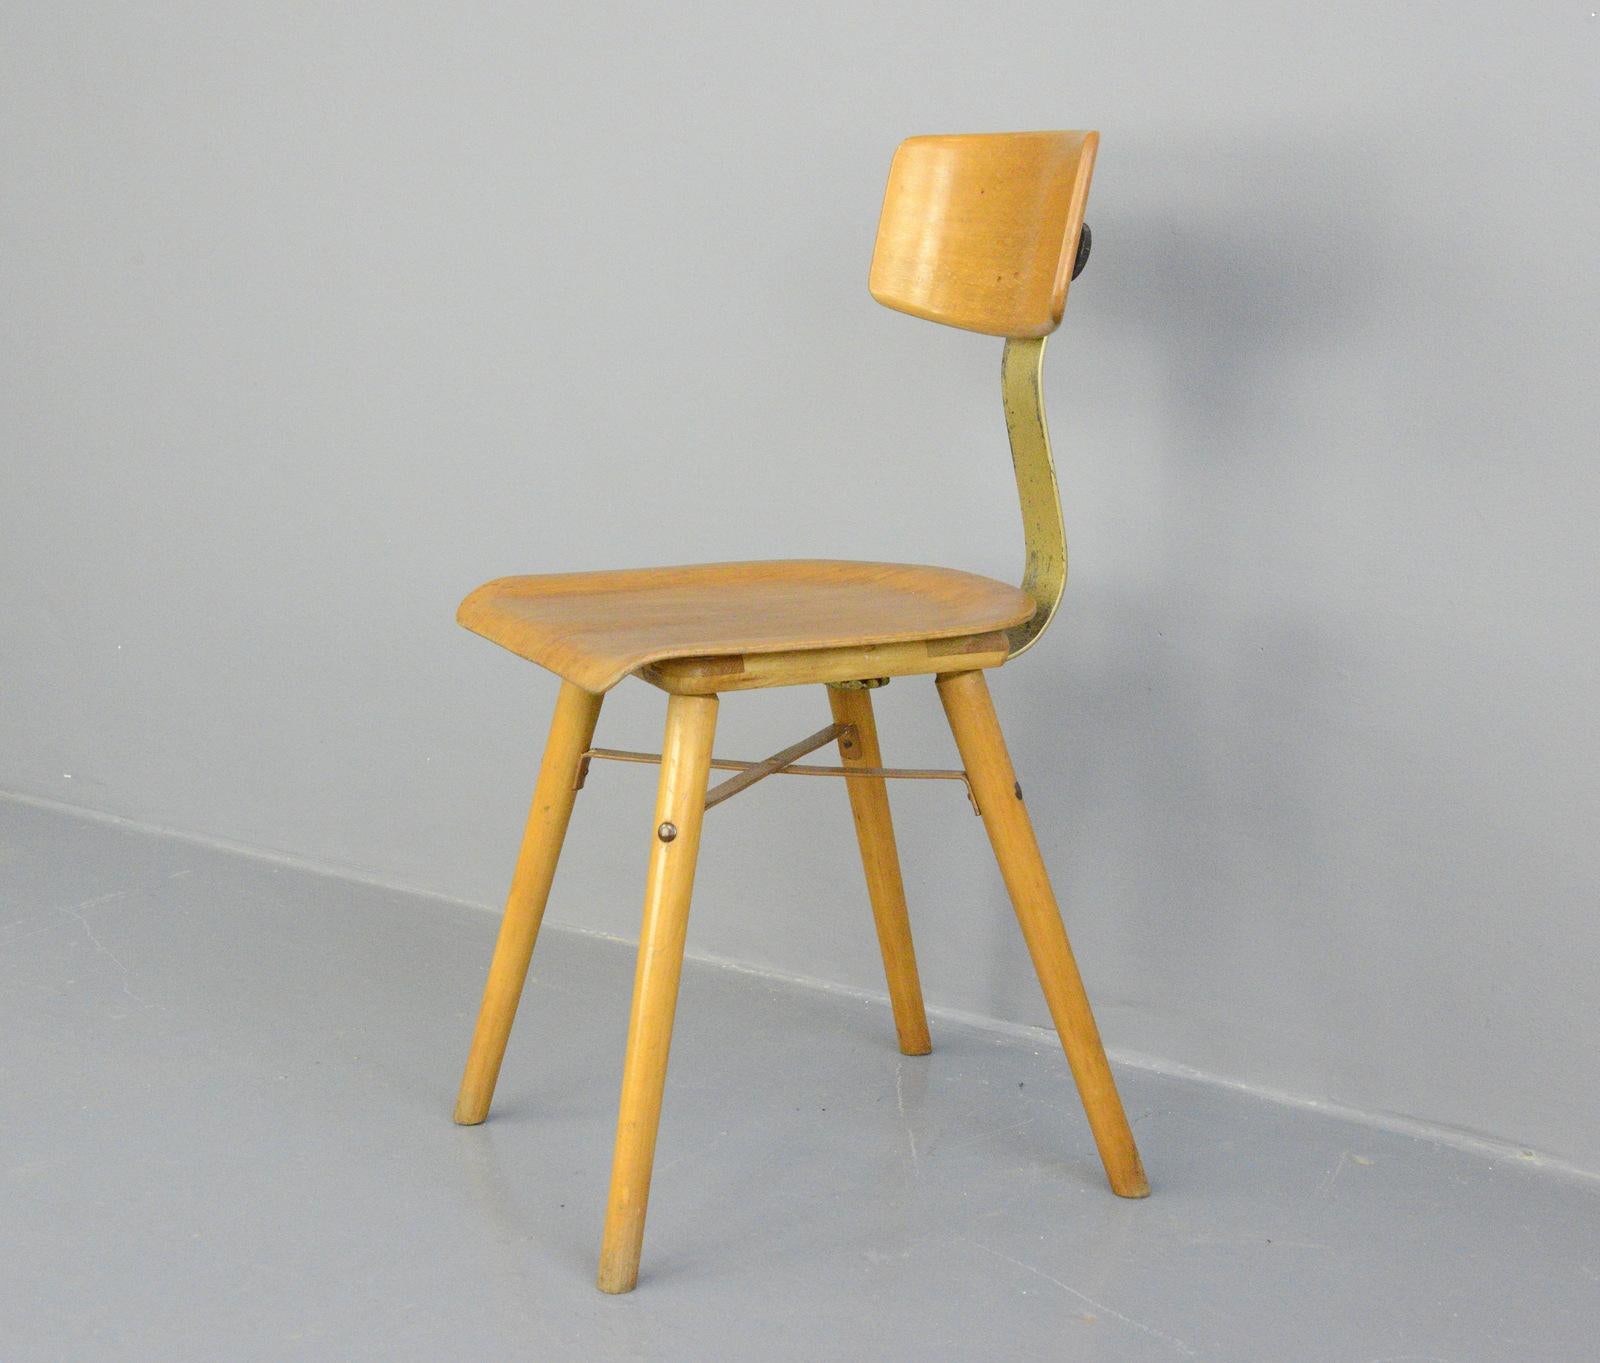 Mid-20th Century Industrial Work Stool By Ama, circa 1930s For Sale